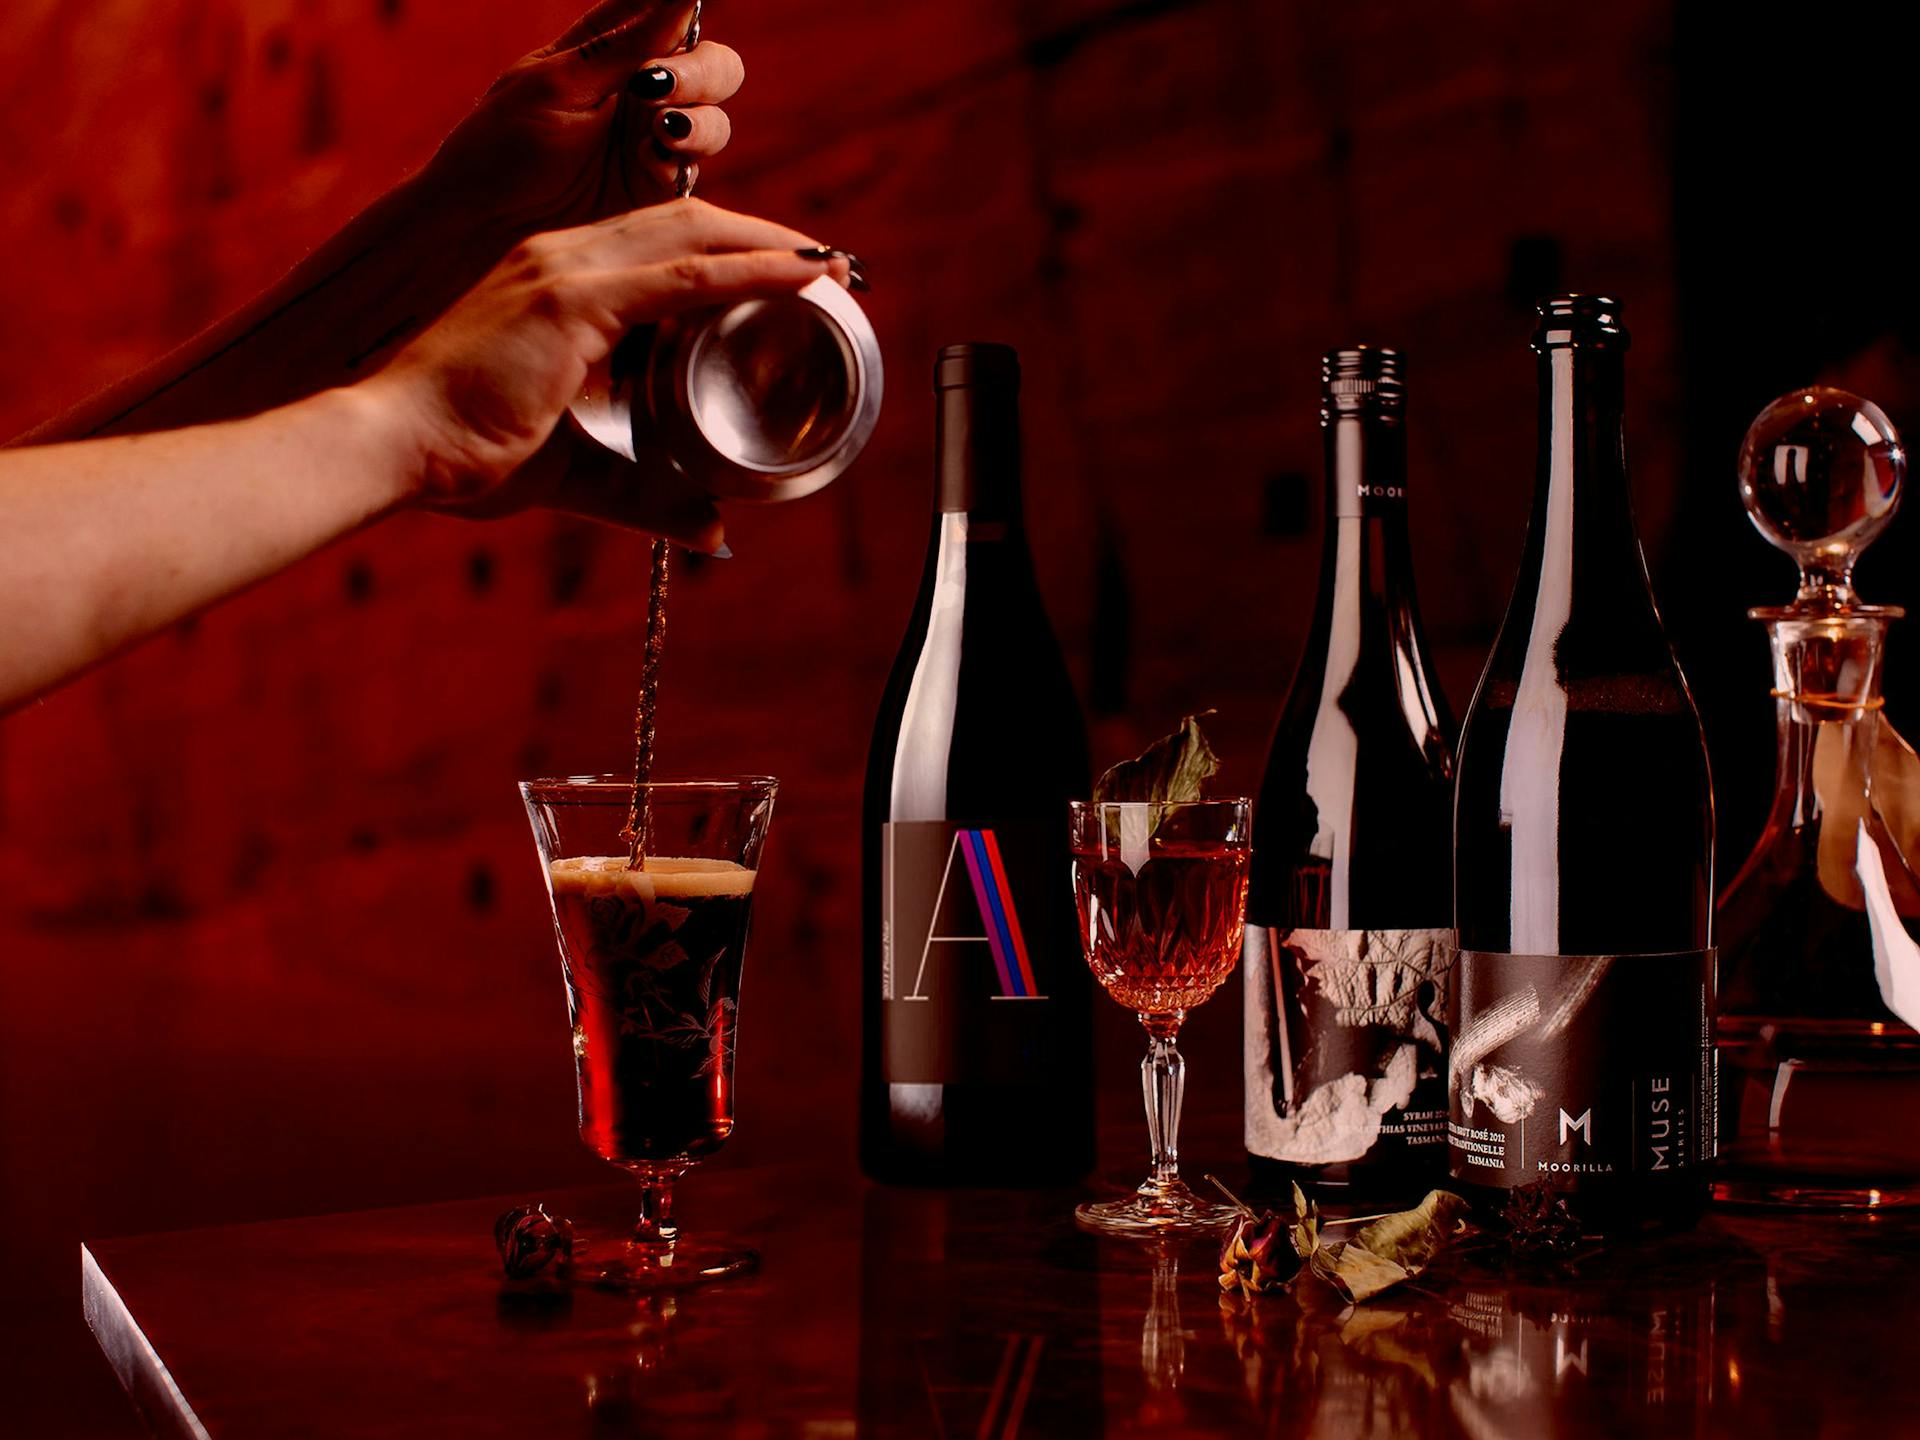 A selection of wine and cocktails against a deep red background